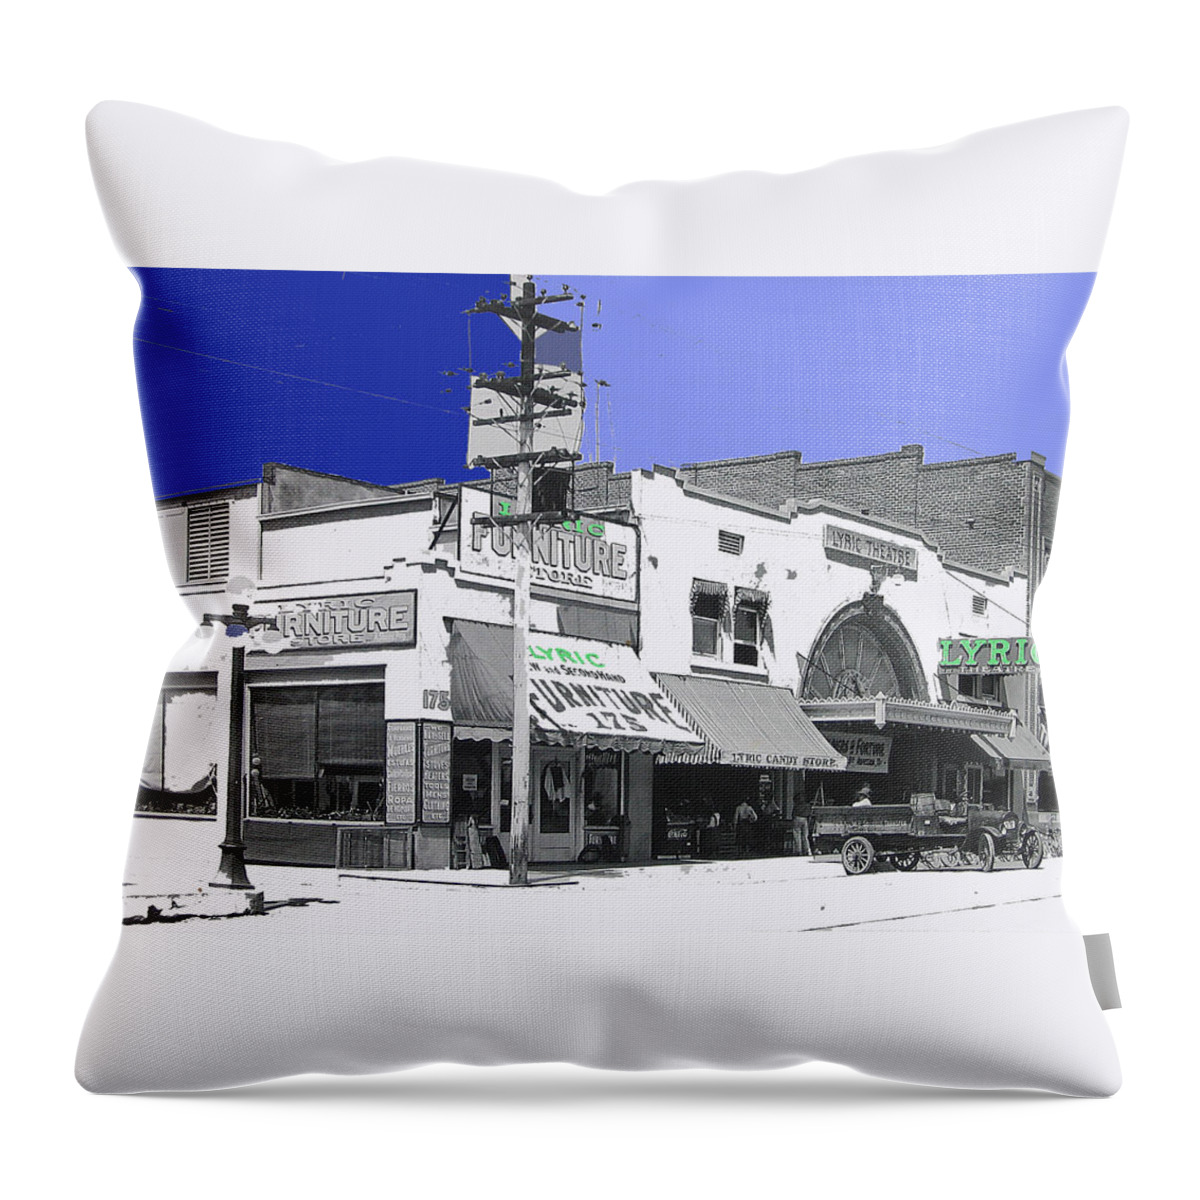 Film Homage Allan Dwan Soldiers Of Fortune 1919 #2 Lyric Theater Tucson Arizona 1919-2008 Throw Pillow featuring the photograph Film homage Allan Dwan Soldiers of Fortune 1919 #2 Lyric Theater Tucson Arizona 1919-2008 by David Lee Guss